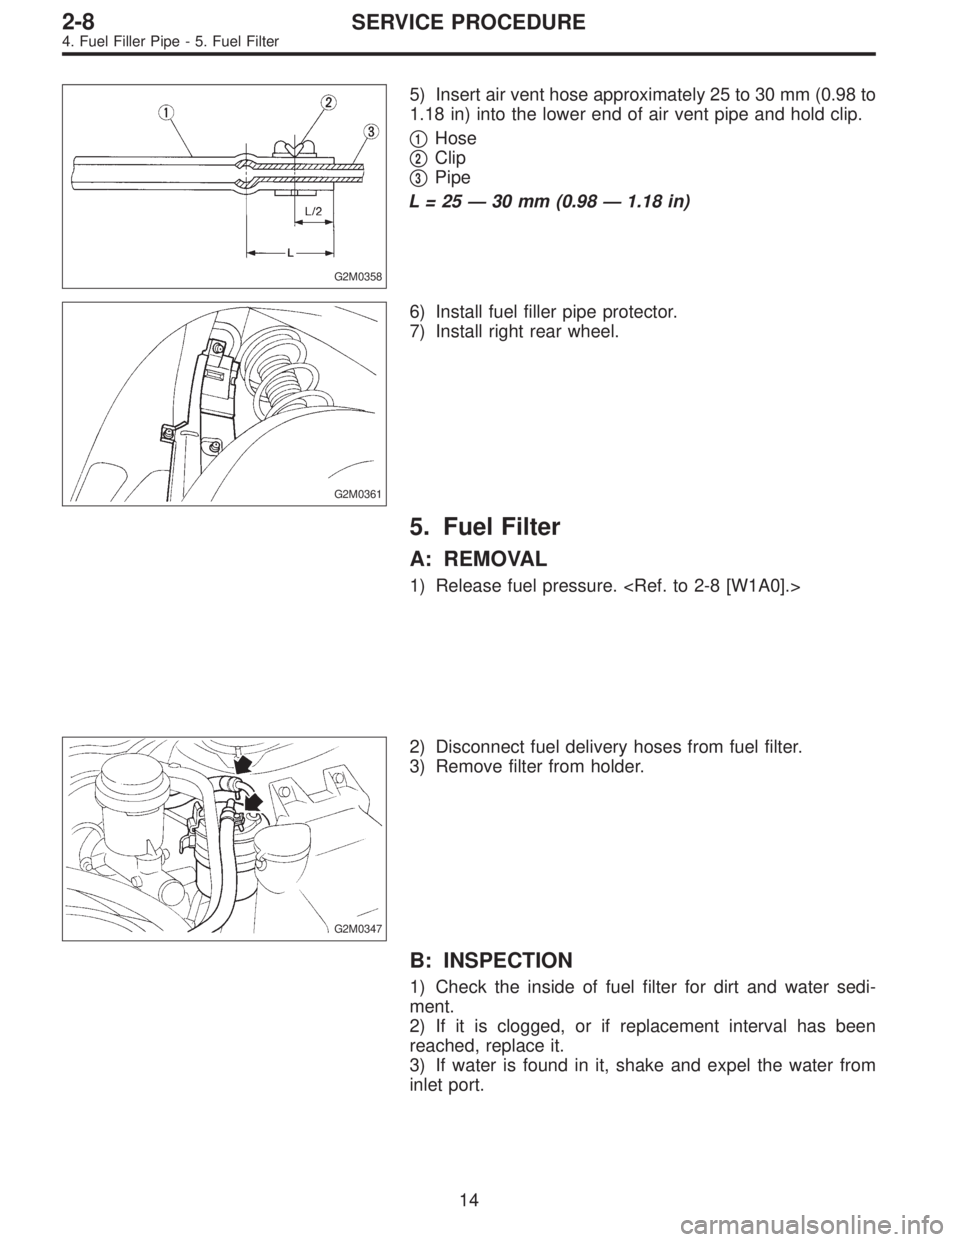 SUBARU LEGACY 1995  Service Repair Manual G2M0358
5) Insert air vent hose approximately 25 to 30 mm (0.98 to
1.18 in) into the lower end of air vent pipe and hold clip.

1Hose

2Clip

3Pipe
L=25—30 mm (0.98—1.18 in)
G2M0361
6) Install 